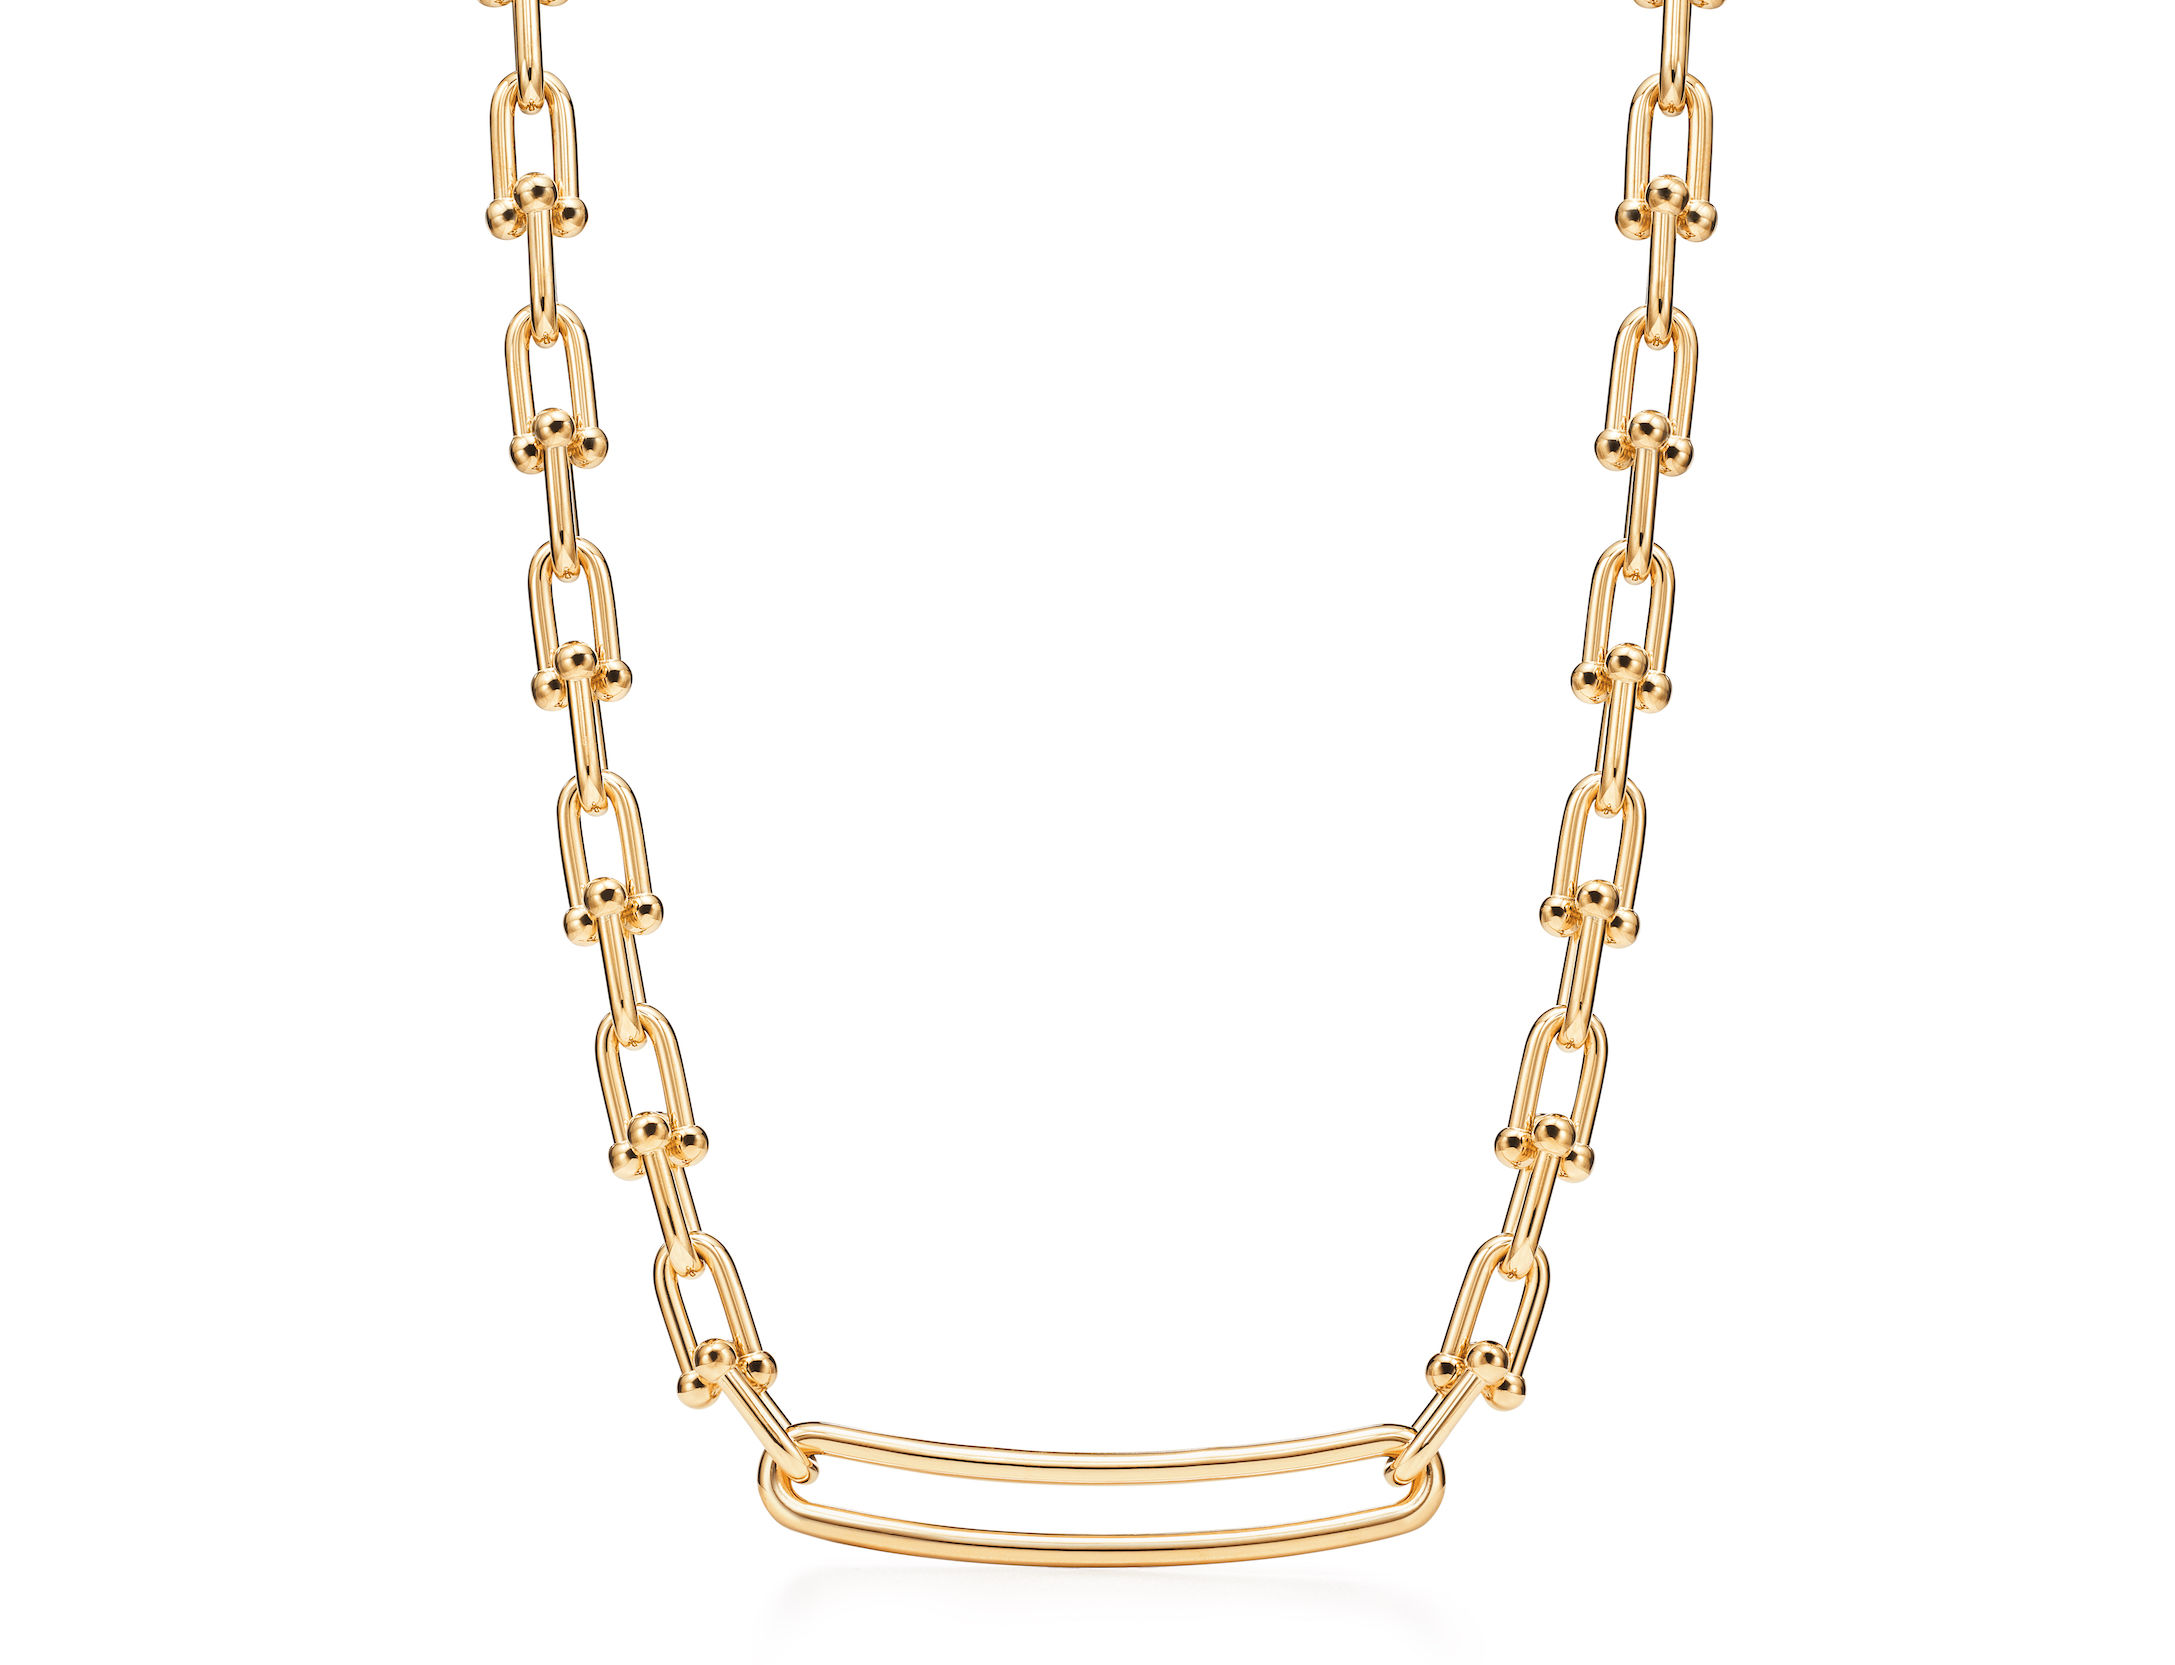 Virgil Abloh Has Created An LV Chain Links Necklace Dedicated To